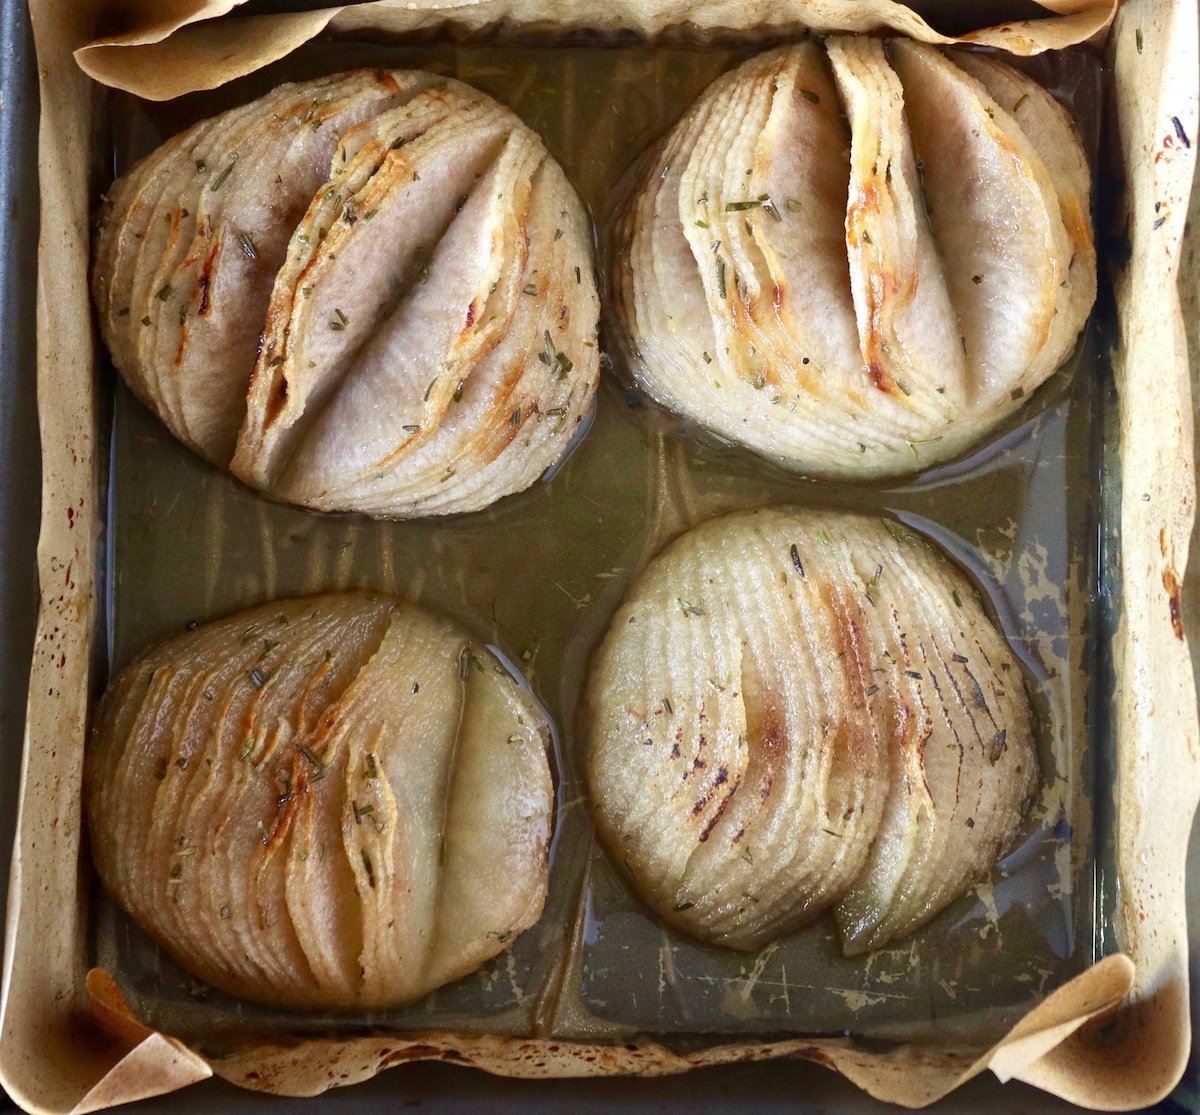 Four golden baked Asian pear halves cut with many slits that don't go all the way through.